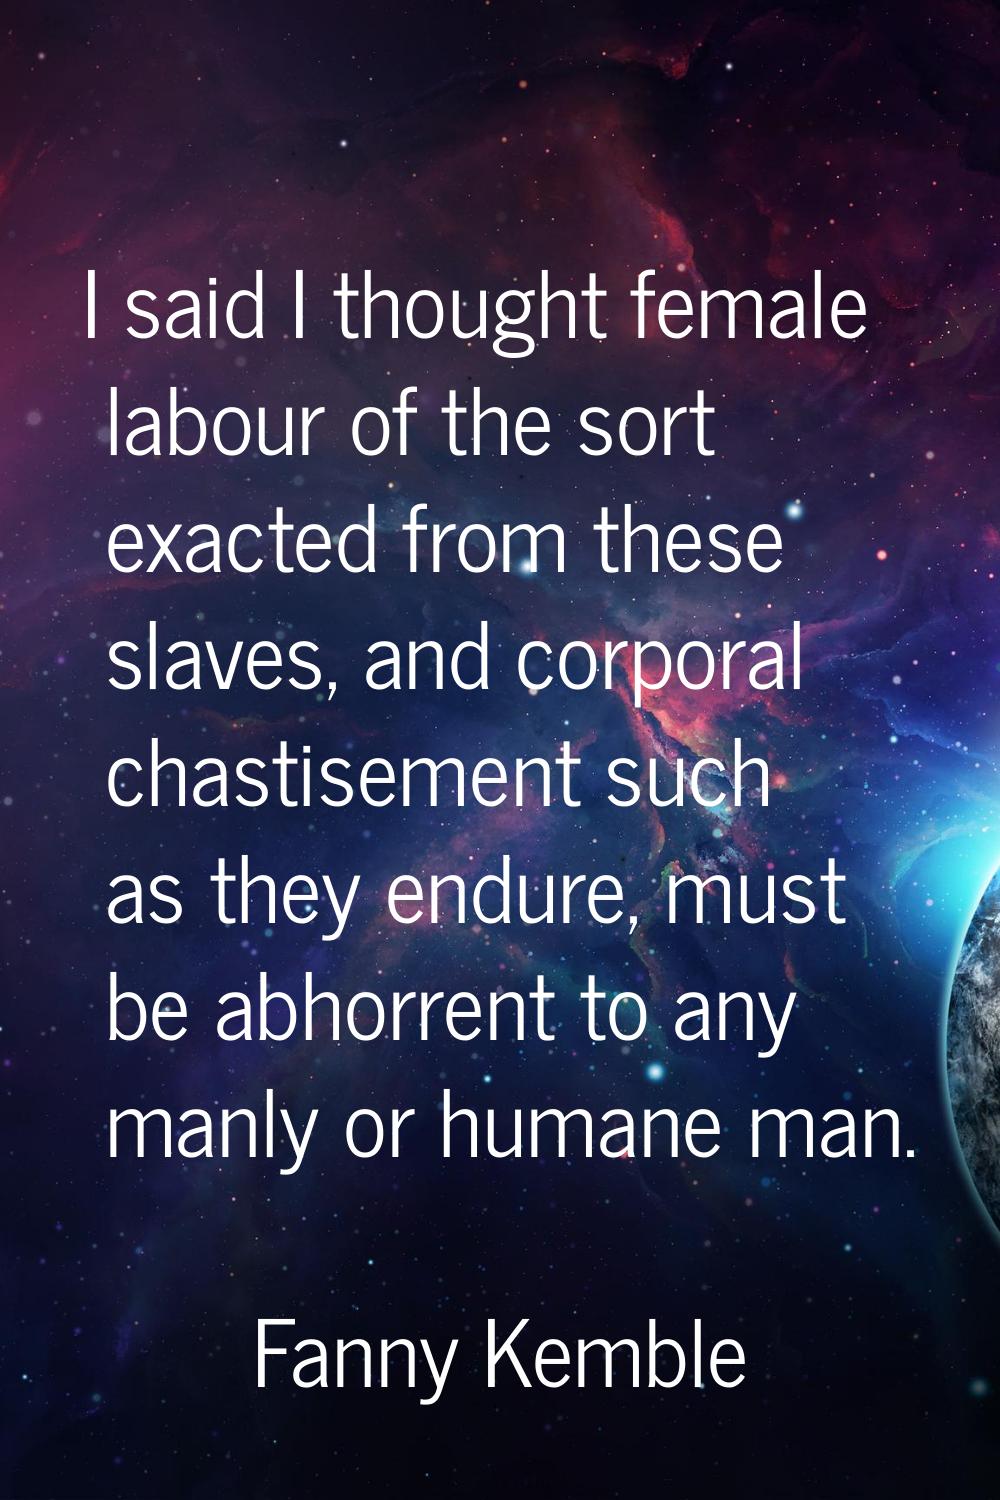 I said I thought female labour of the sort exacted from these slaves, and corporal chastisement suc